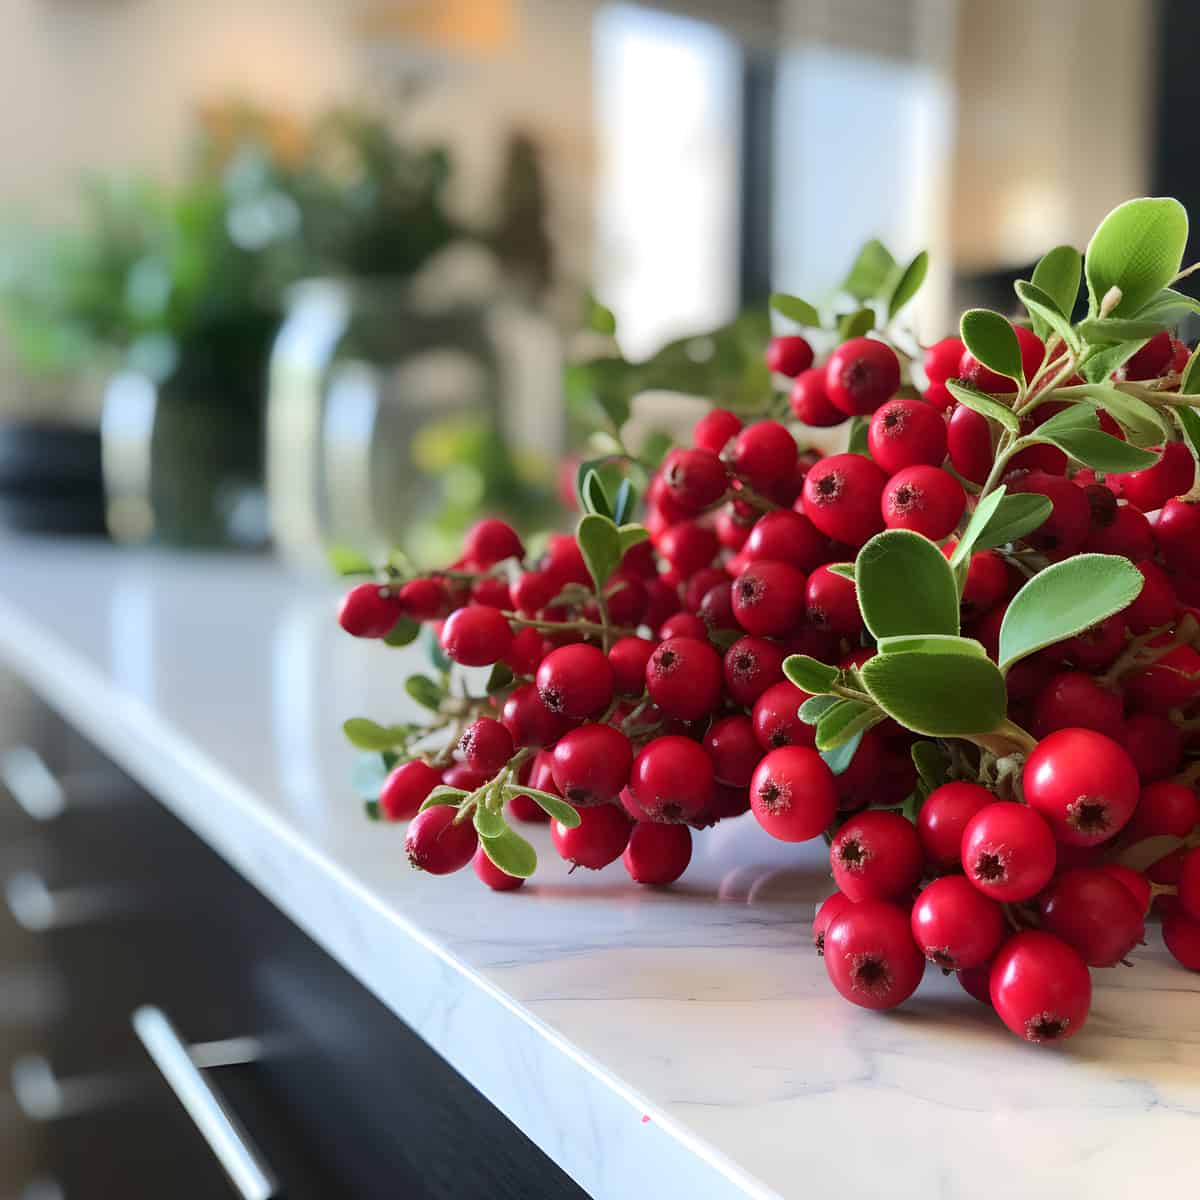 Bearberry on a kitchen counter